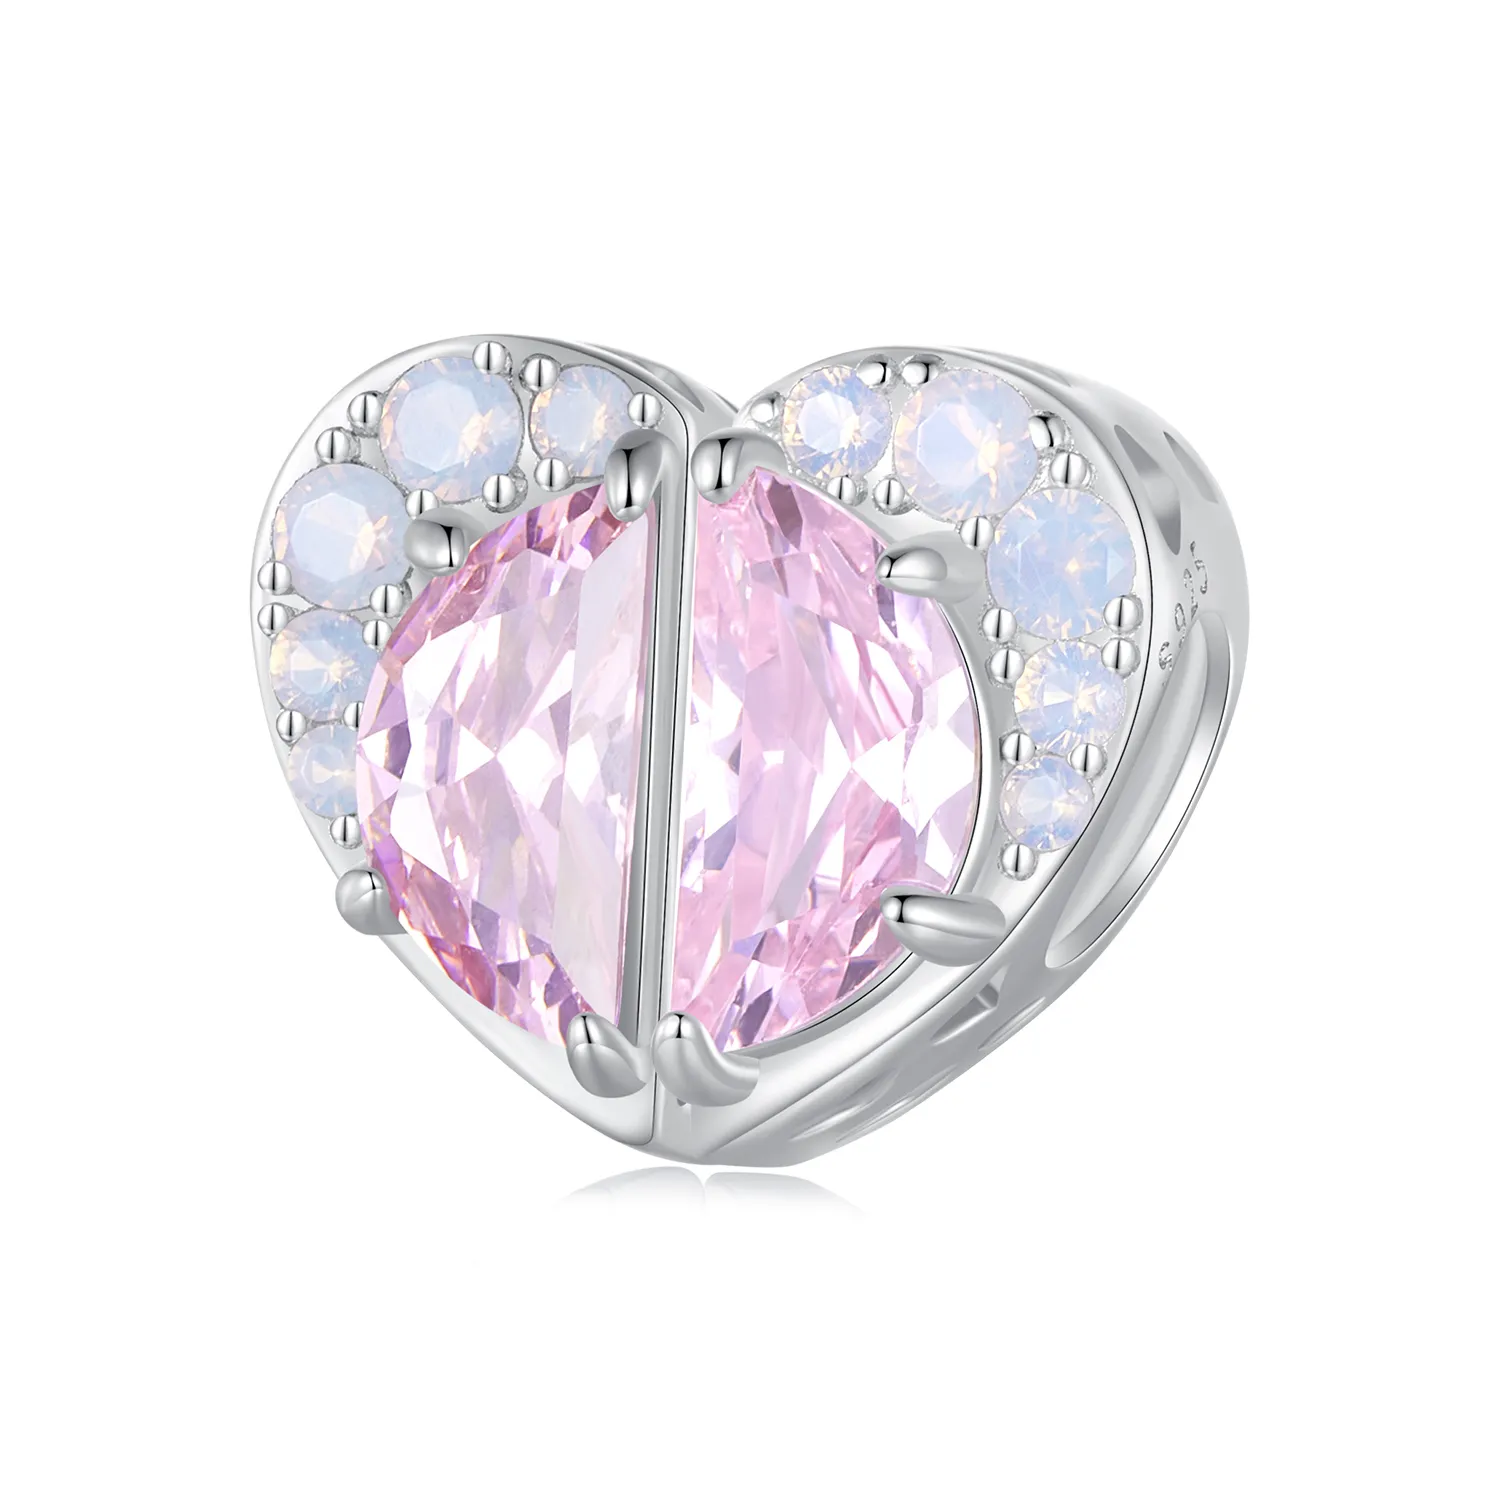 Pandora Style Pink Sisters Heart Charm - SCC2641